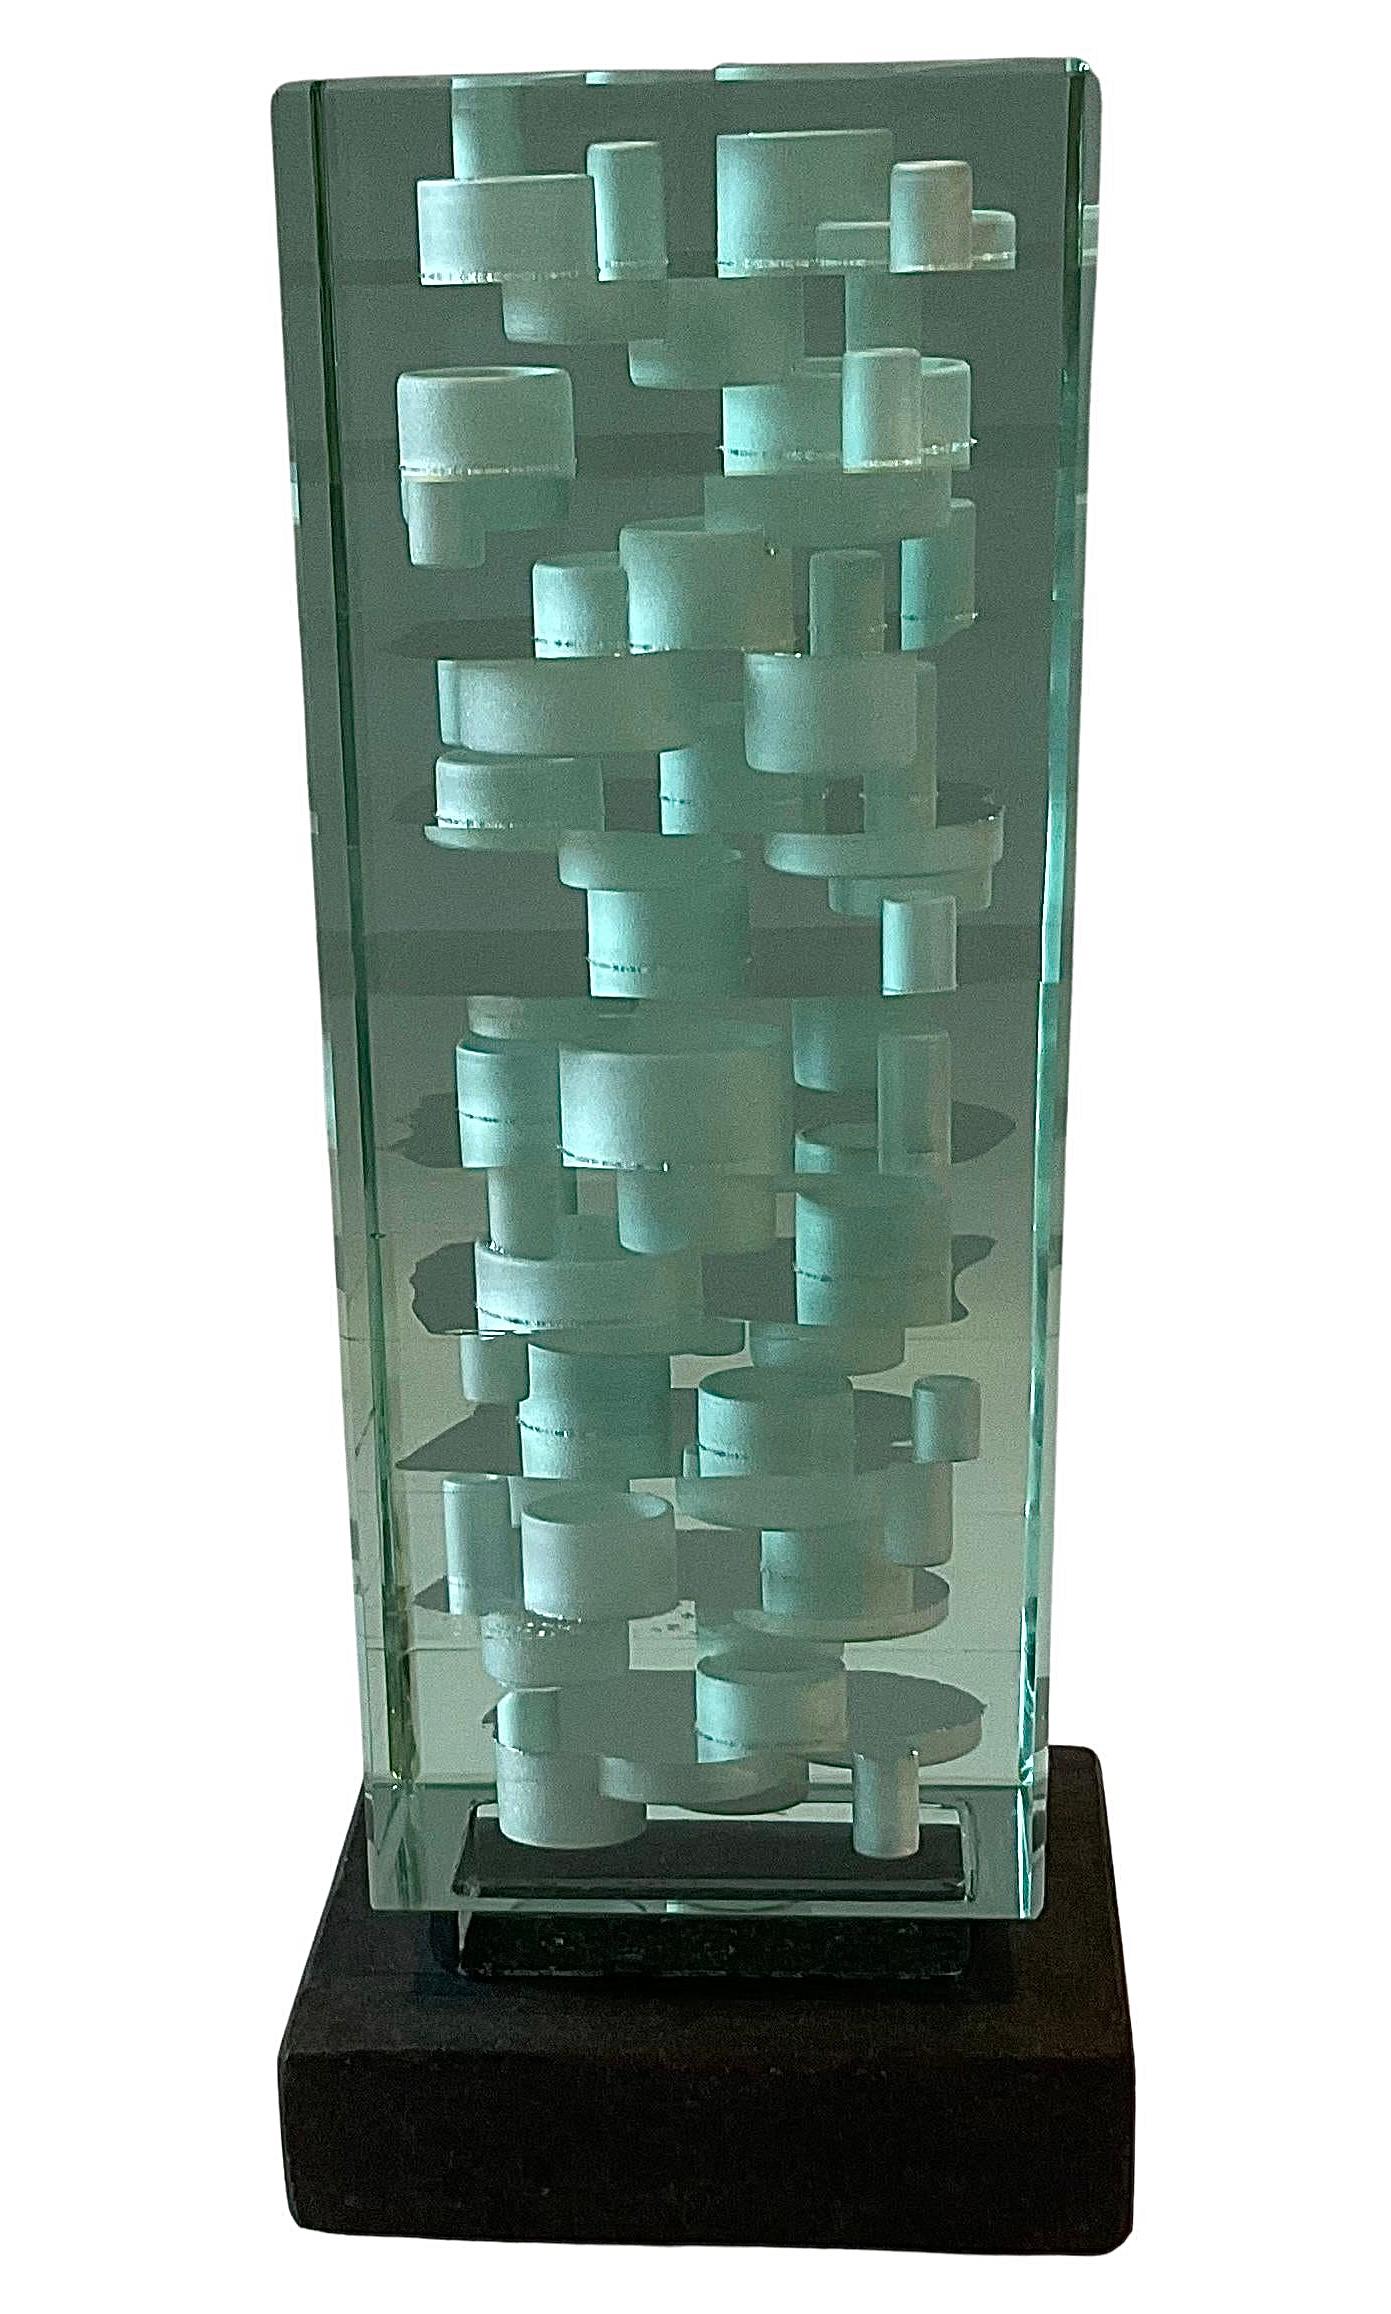 Amazing abstract Murano glass sculpture signed and dated by Luciano Vistosi. Vibrant green layered glass with abstract white shapes. dated 1985.